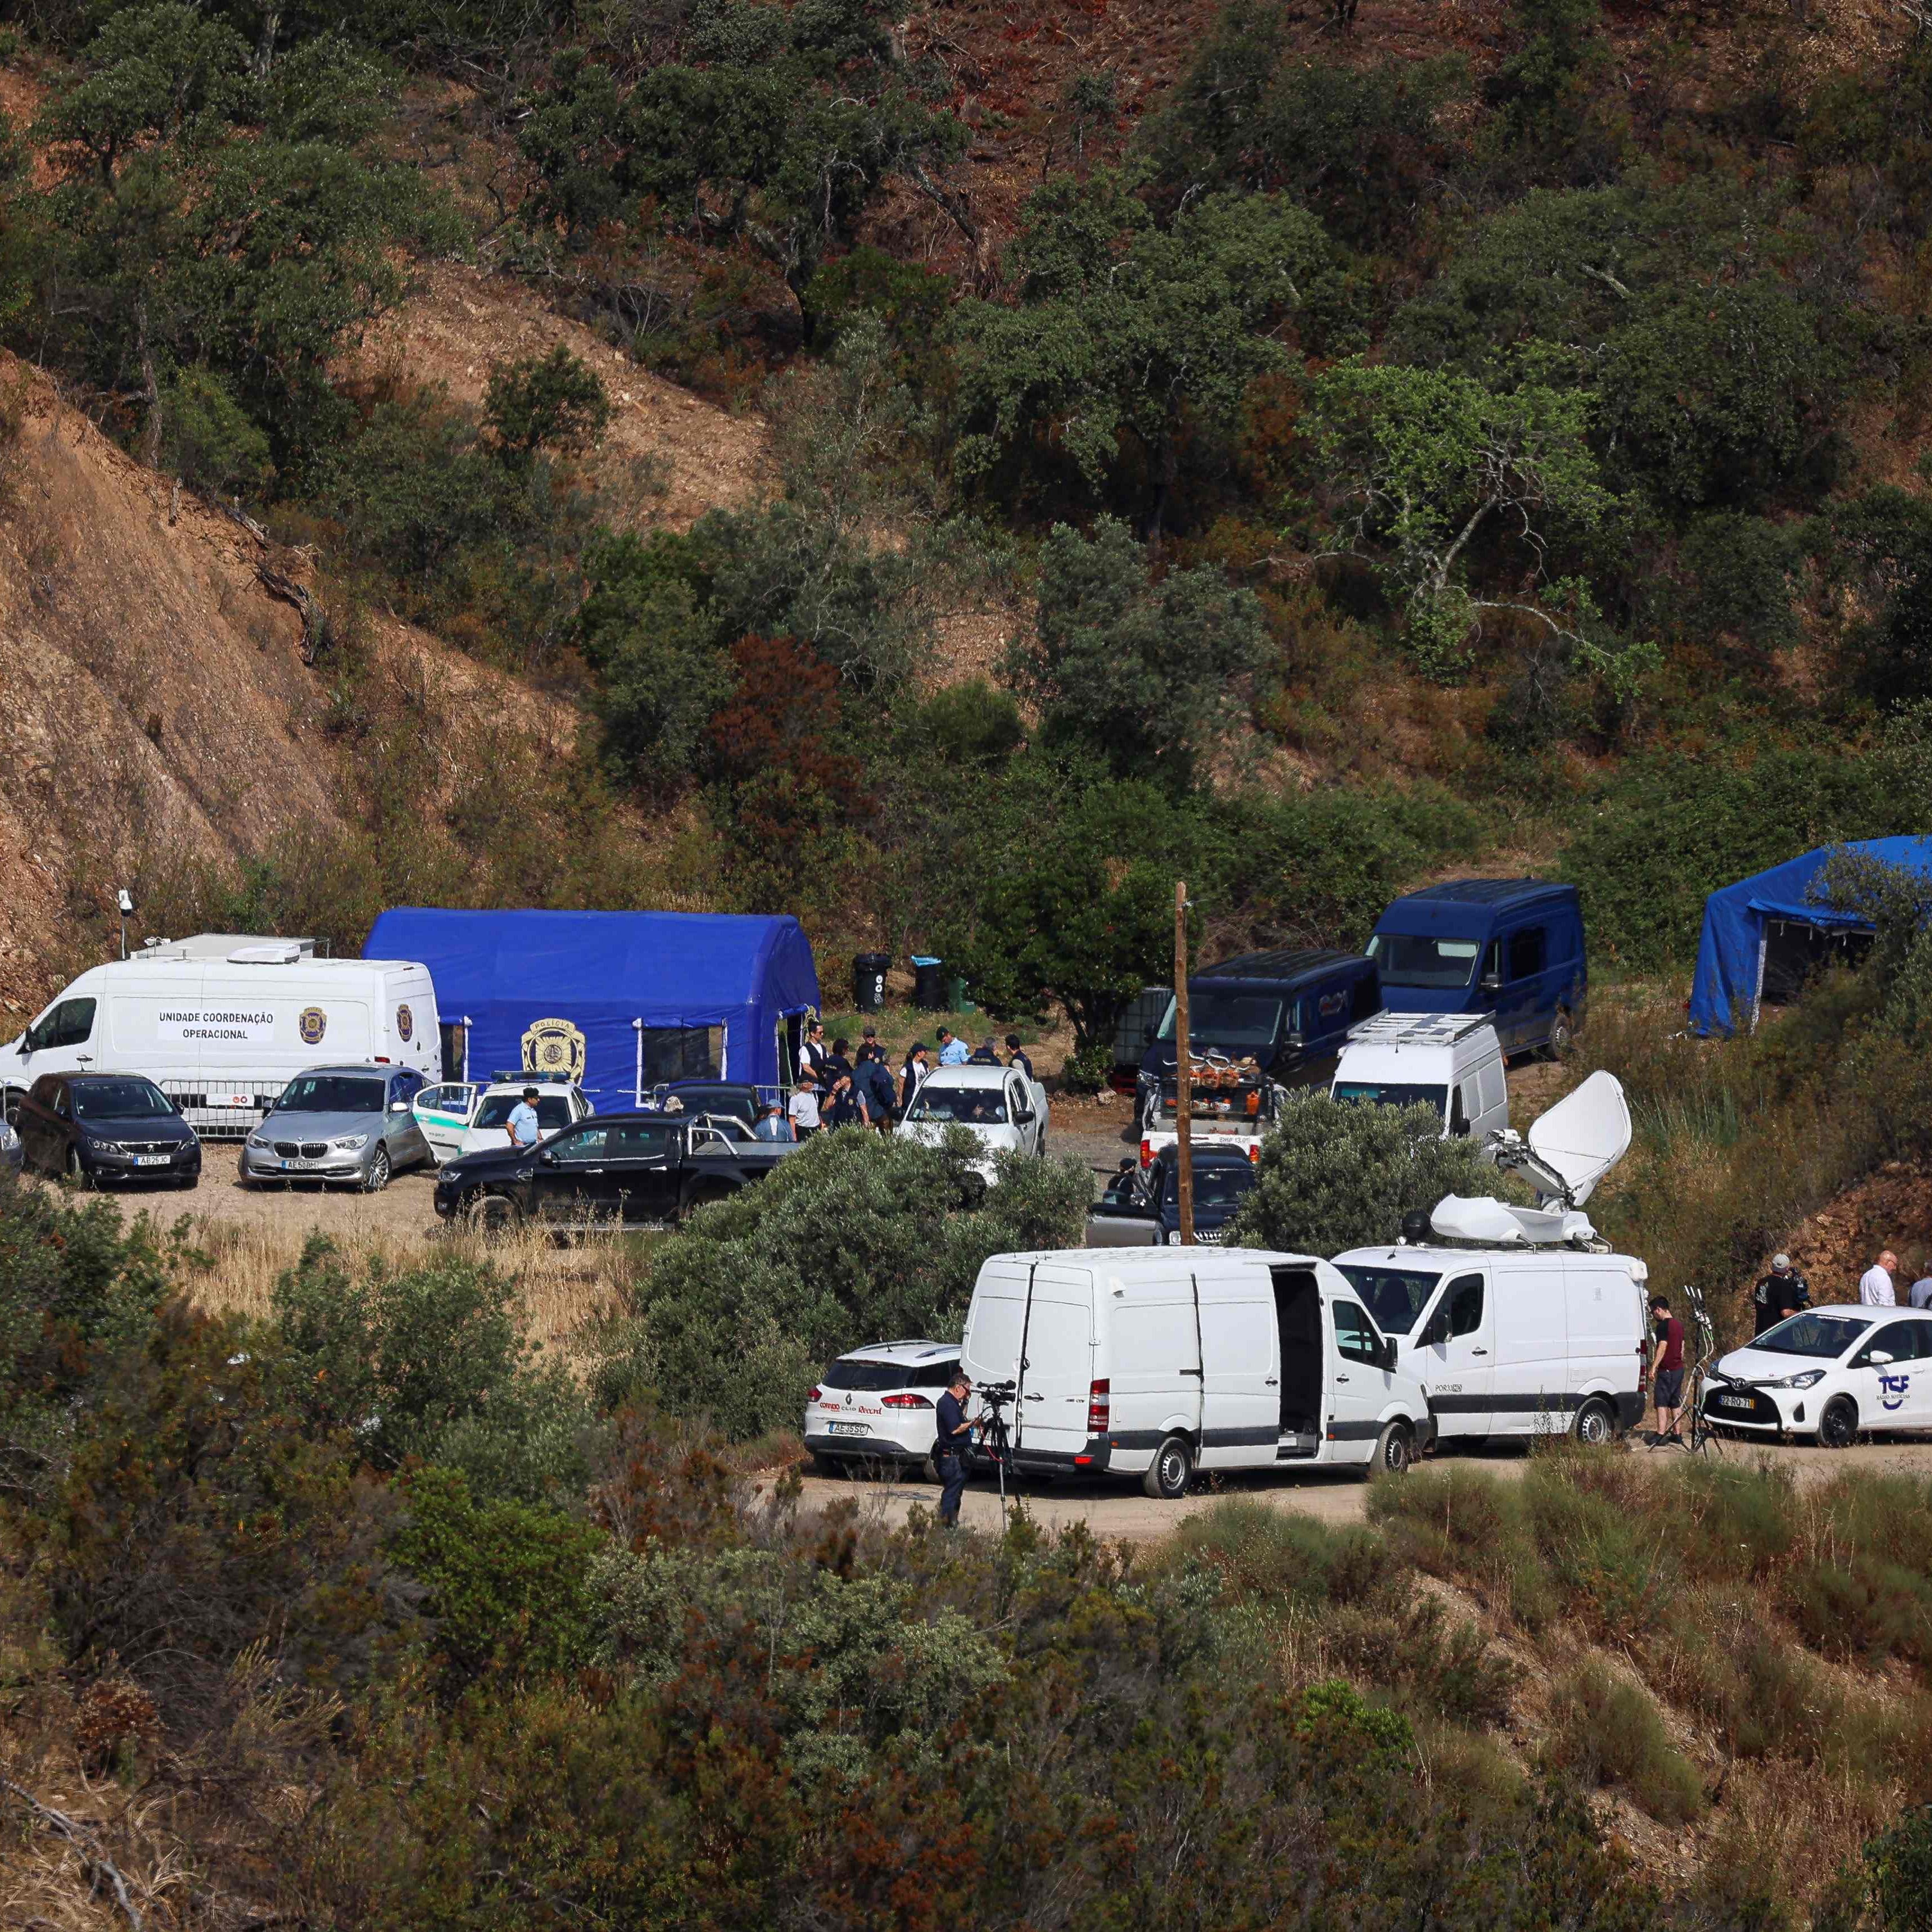 Portuguese authorities from the Judicial Police (PJ) criminal investigation unit work during a new search operation amid the investigation into the disappearance of Madeleine McCann (Maddie) at the Arade dam, in Silves, near Praia da Luz, on 23 May, 2023. This operation stems from a European Investigation Order addressed by the German authorities to Portugal and focuses on the Arade dam, located about 50 kilometers from Praia da Luz, the place where the child disappeared in May 2007, 16 years ago, while on vacation with   her parents.